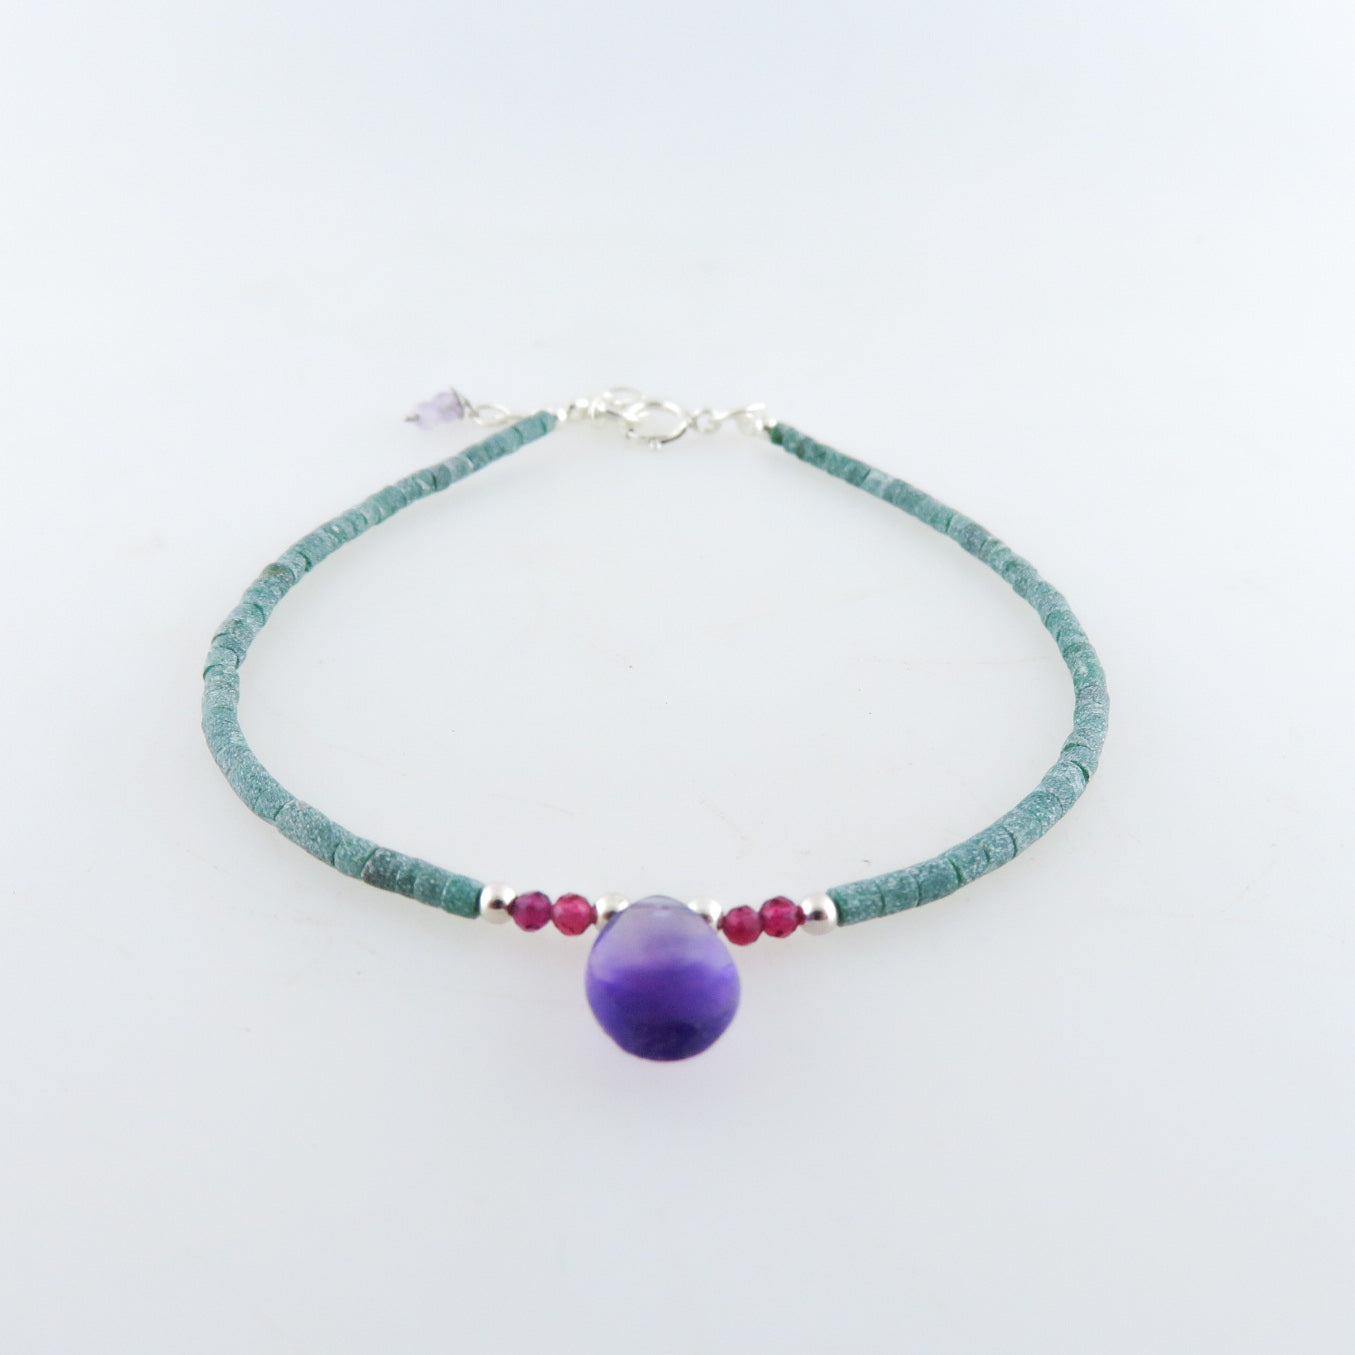 Emerald Bracelet with Amethyst, Garnet and Silver Beads